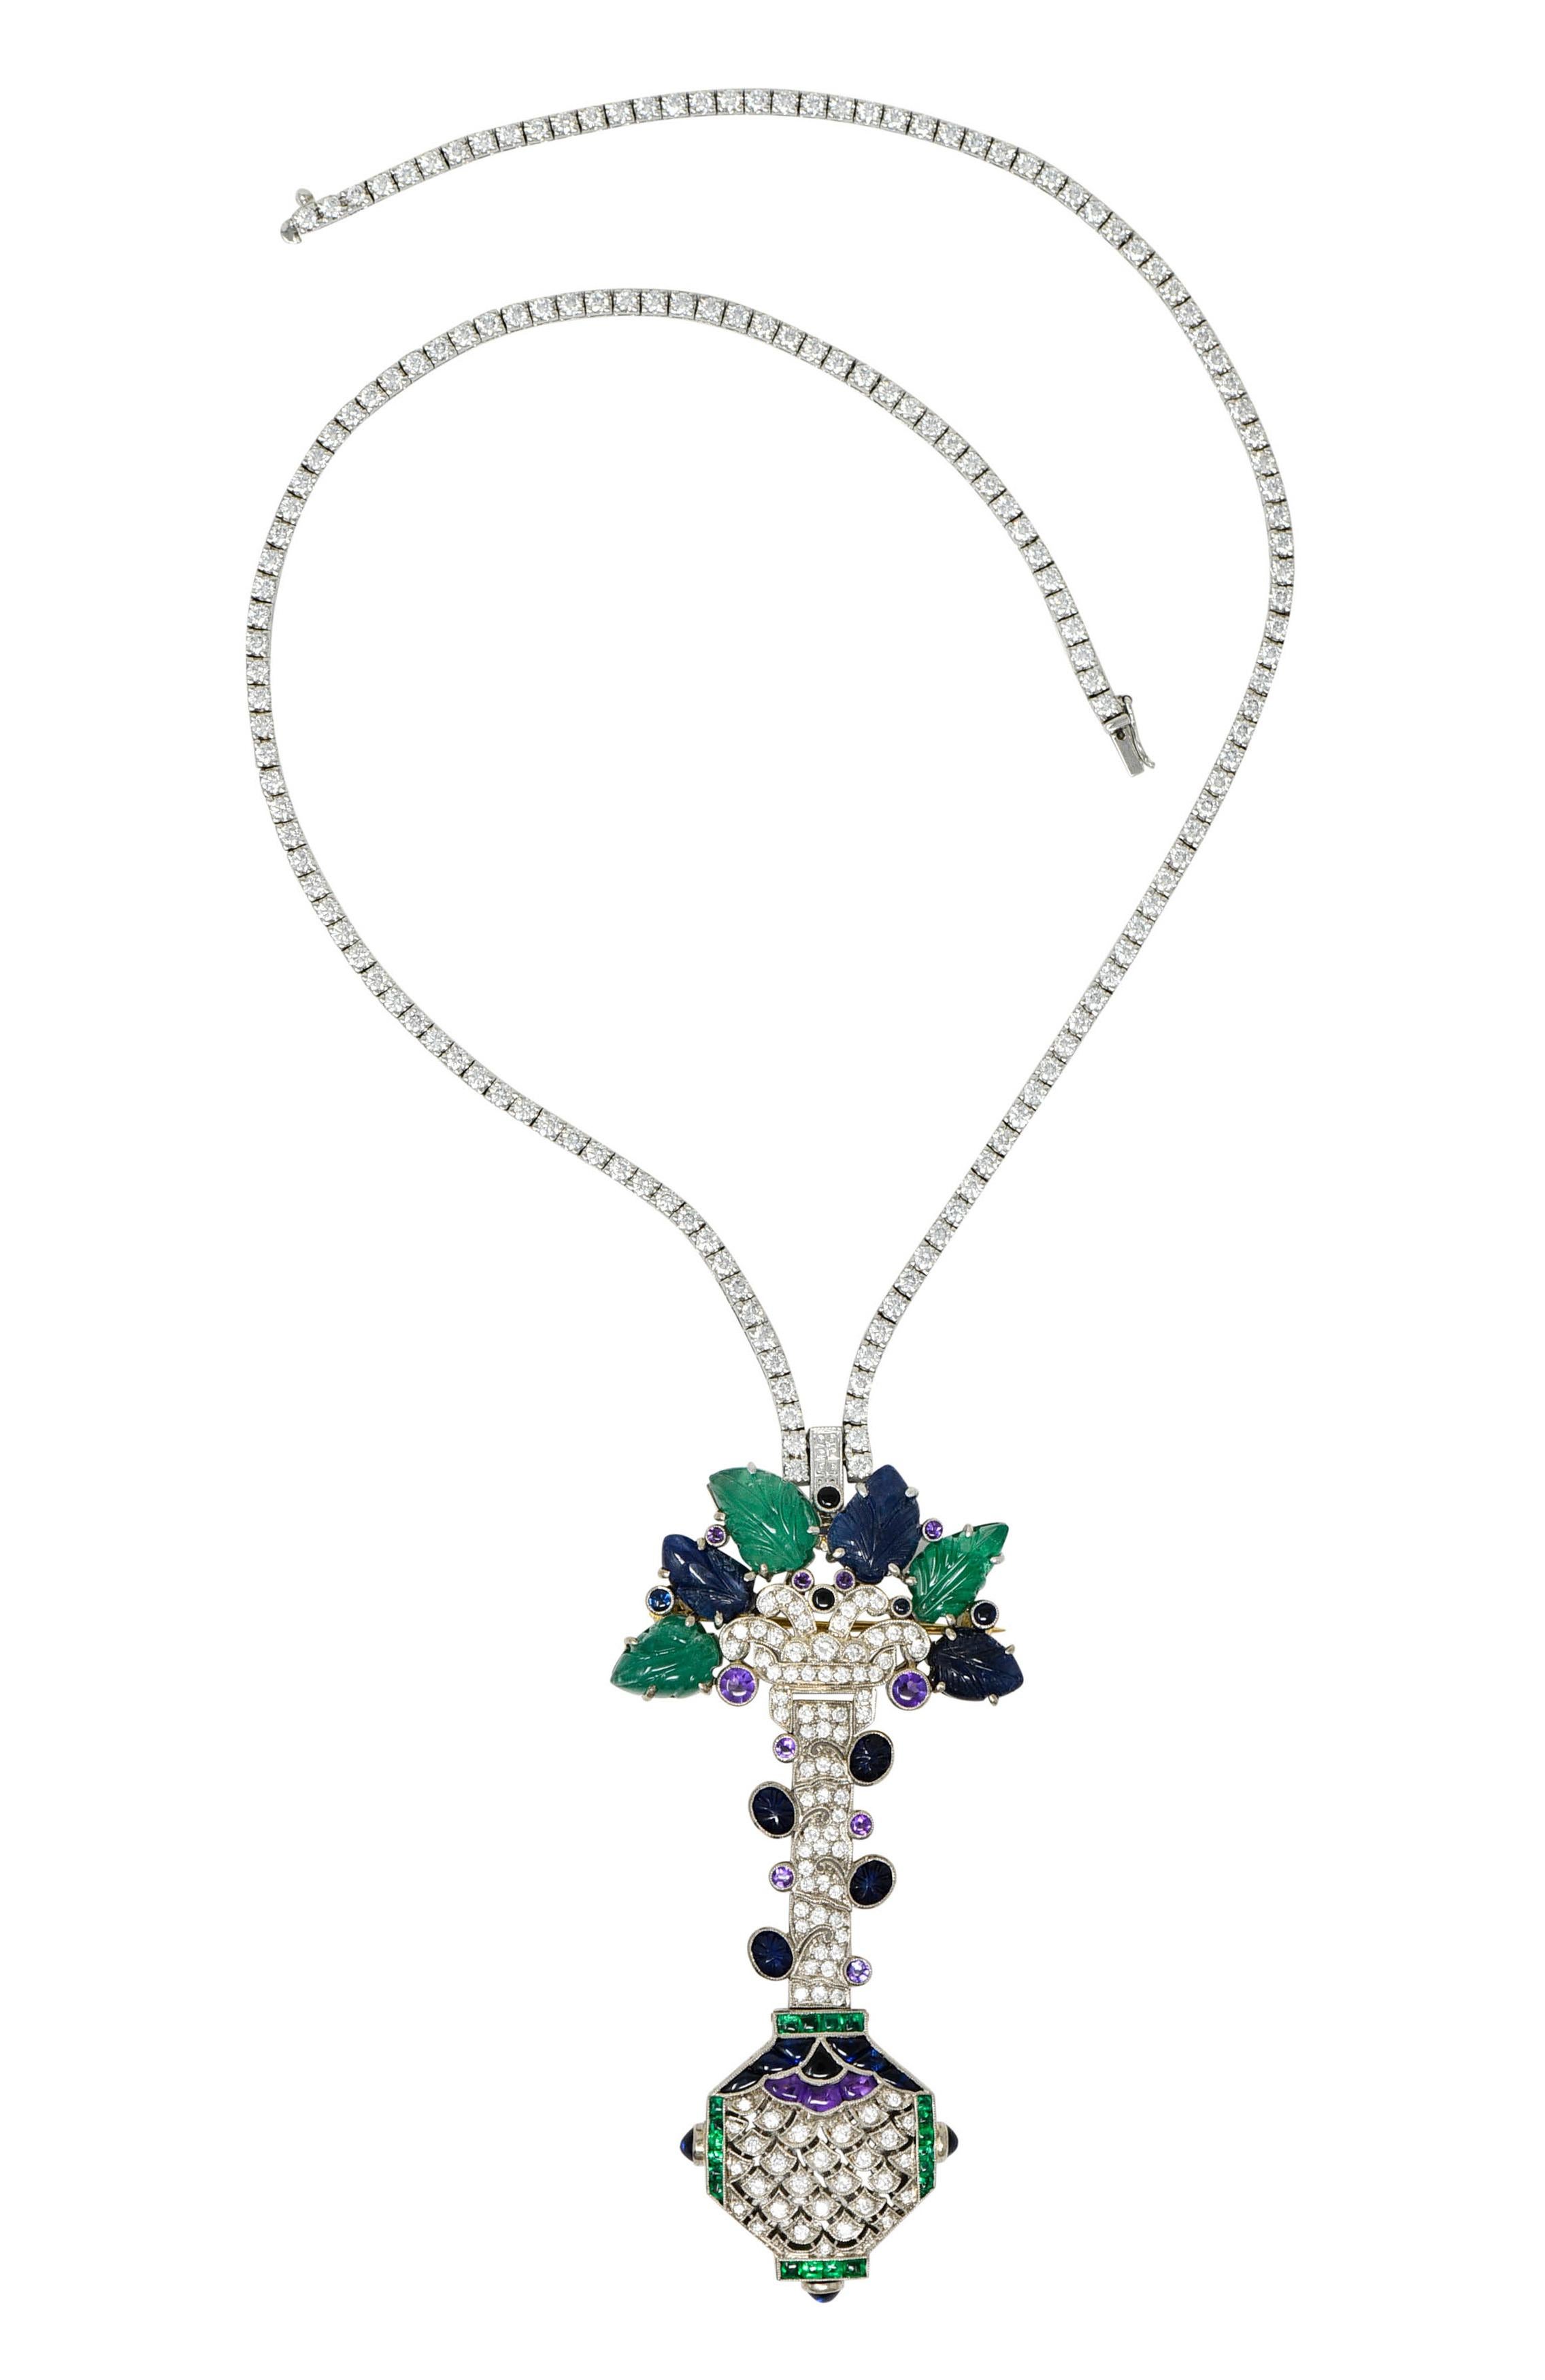 Articulated riviera style necklace is comprised of individual links basket set with round brilliant cut diamonds

Very well matched and weighing in total approximately 7.25 carats - G to I color with VS clarity

Featuring a detachable pendant brooch